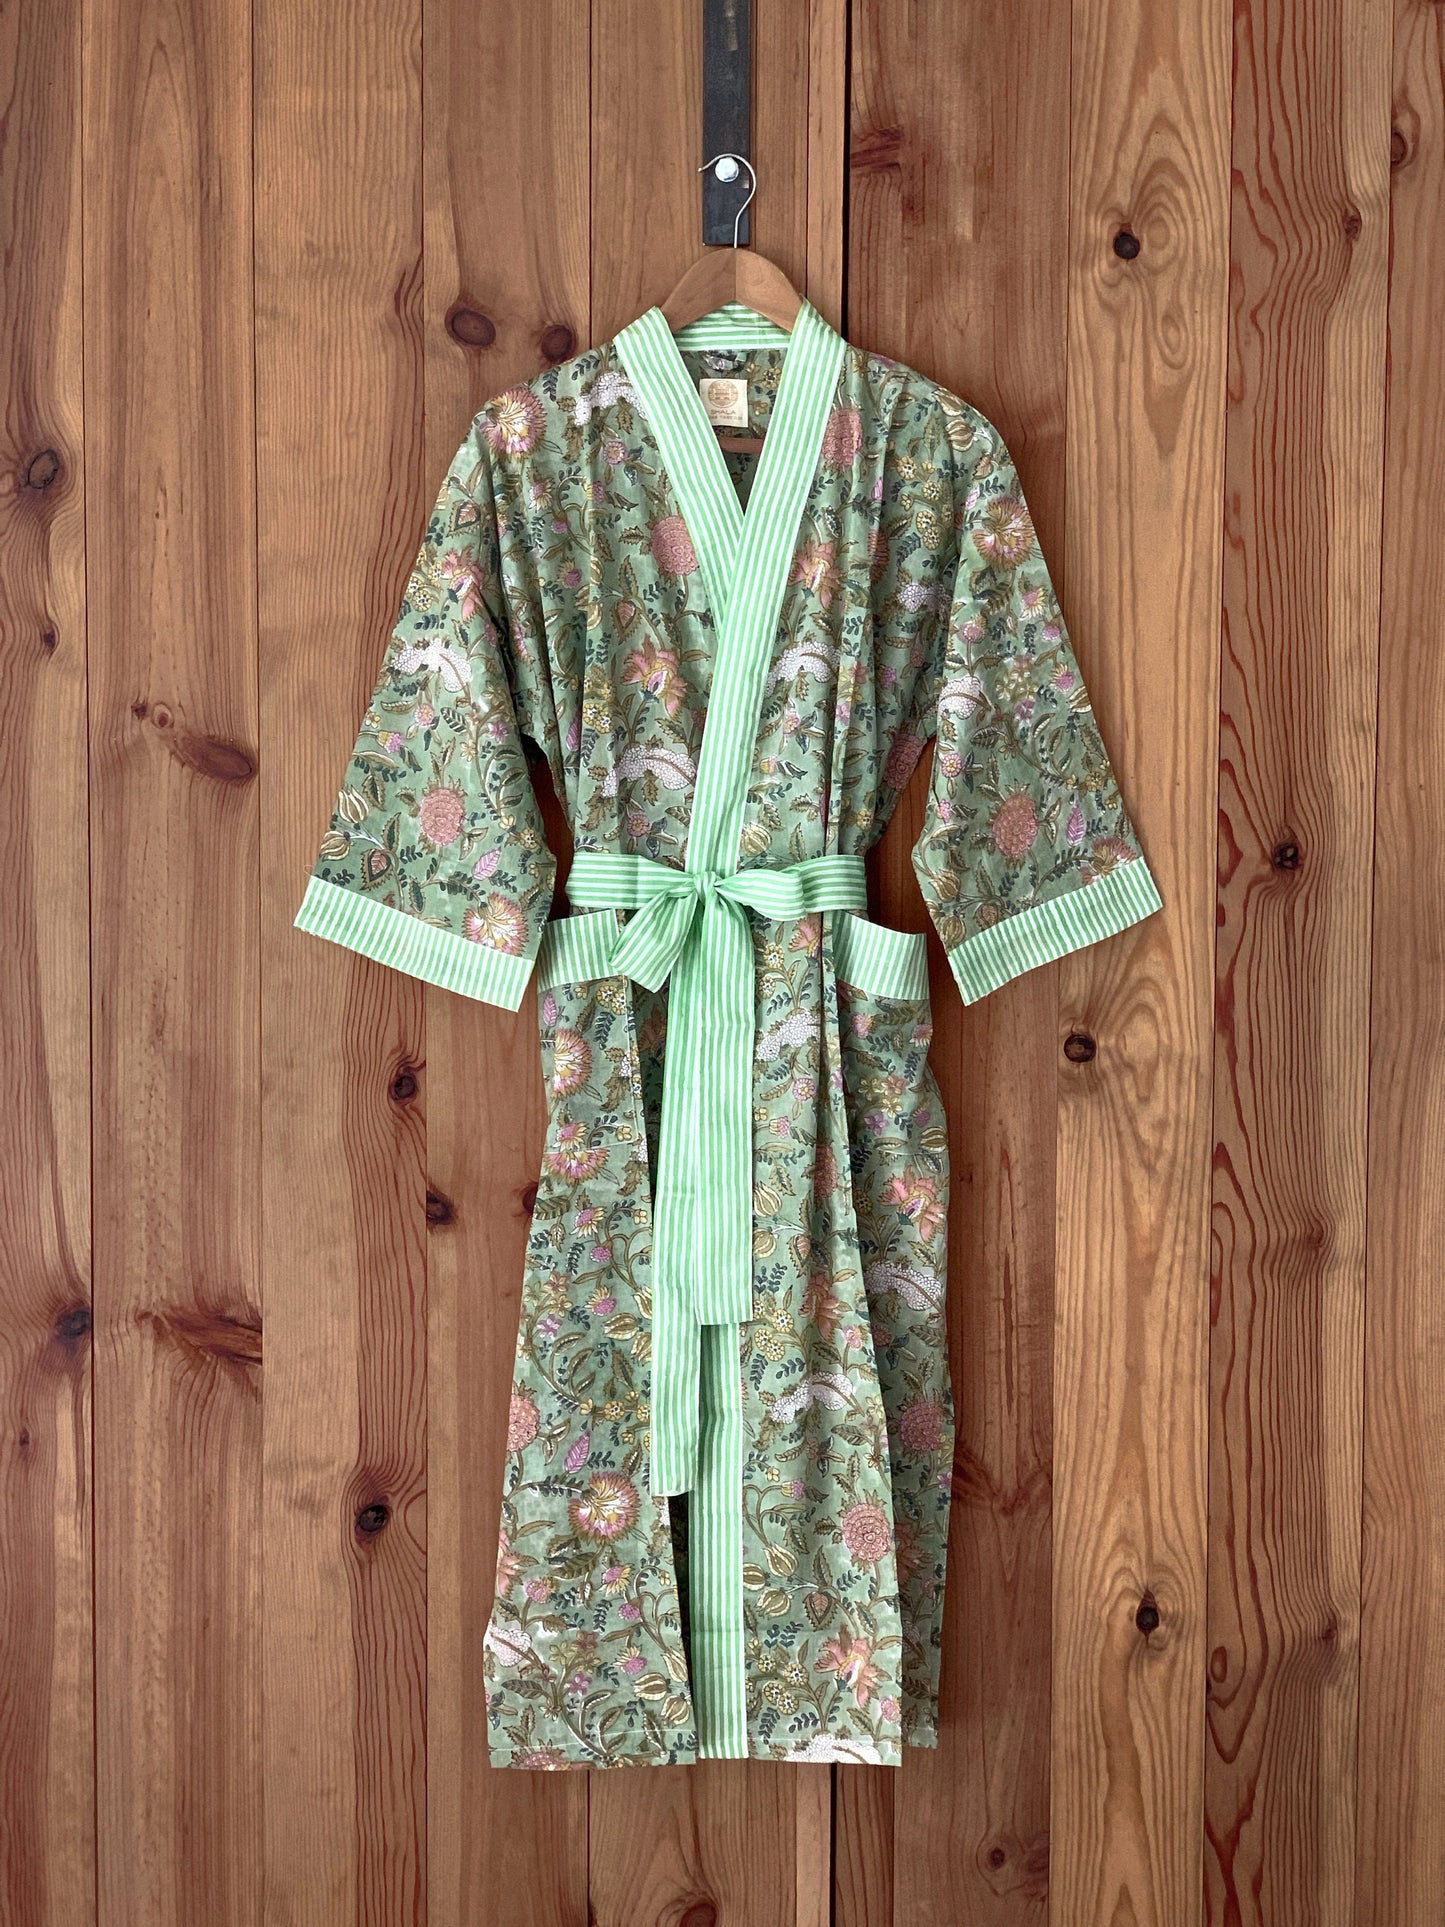 Gift SET Kimono robe &amp; matching slippers 100% pure cotton handcrafted block print in India Green and pink mix